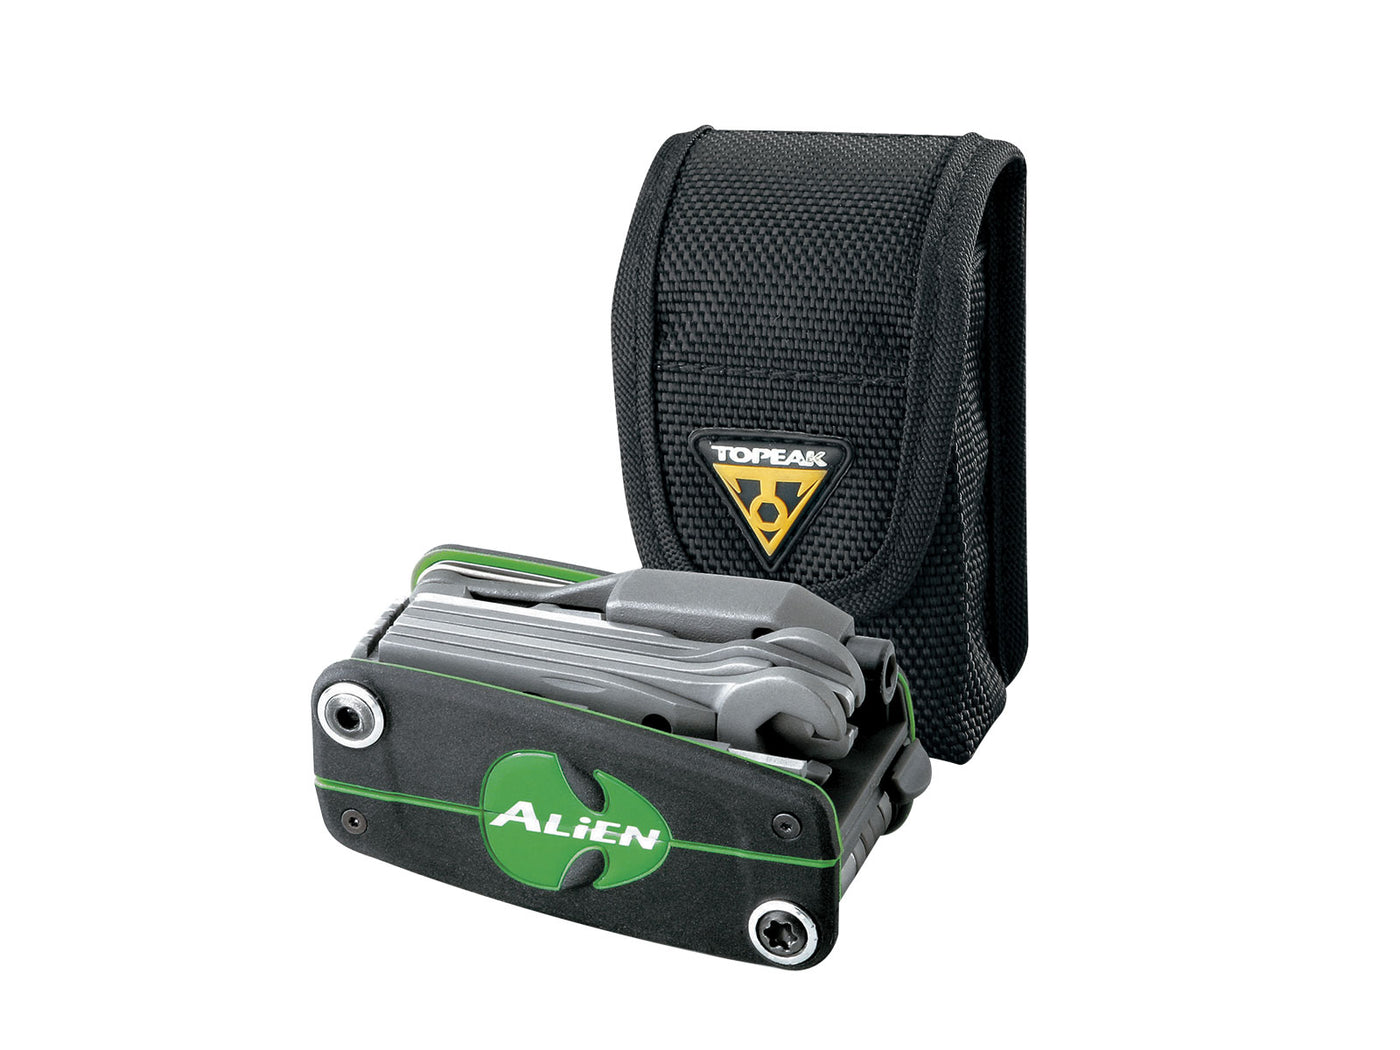 Topeak Alien III Folding Bicycle Tool With Clip Bag - Cyclop.in